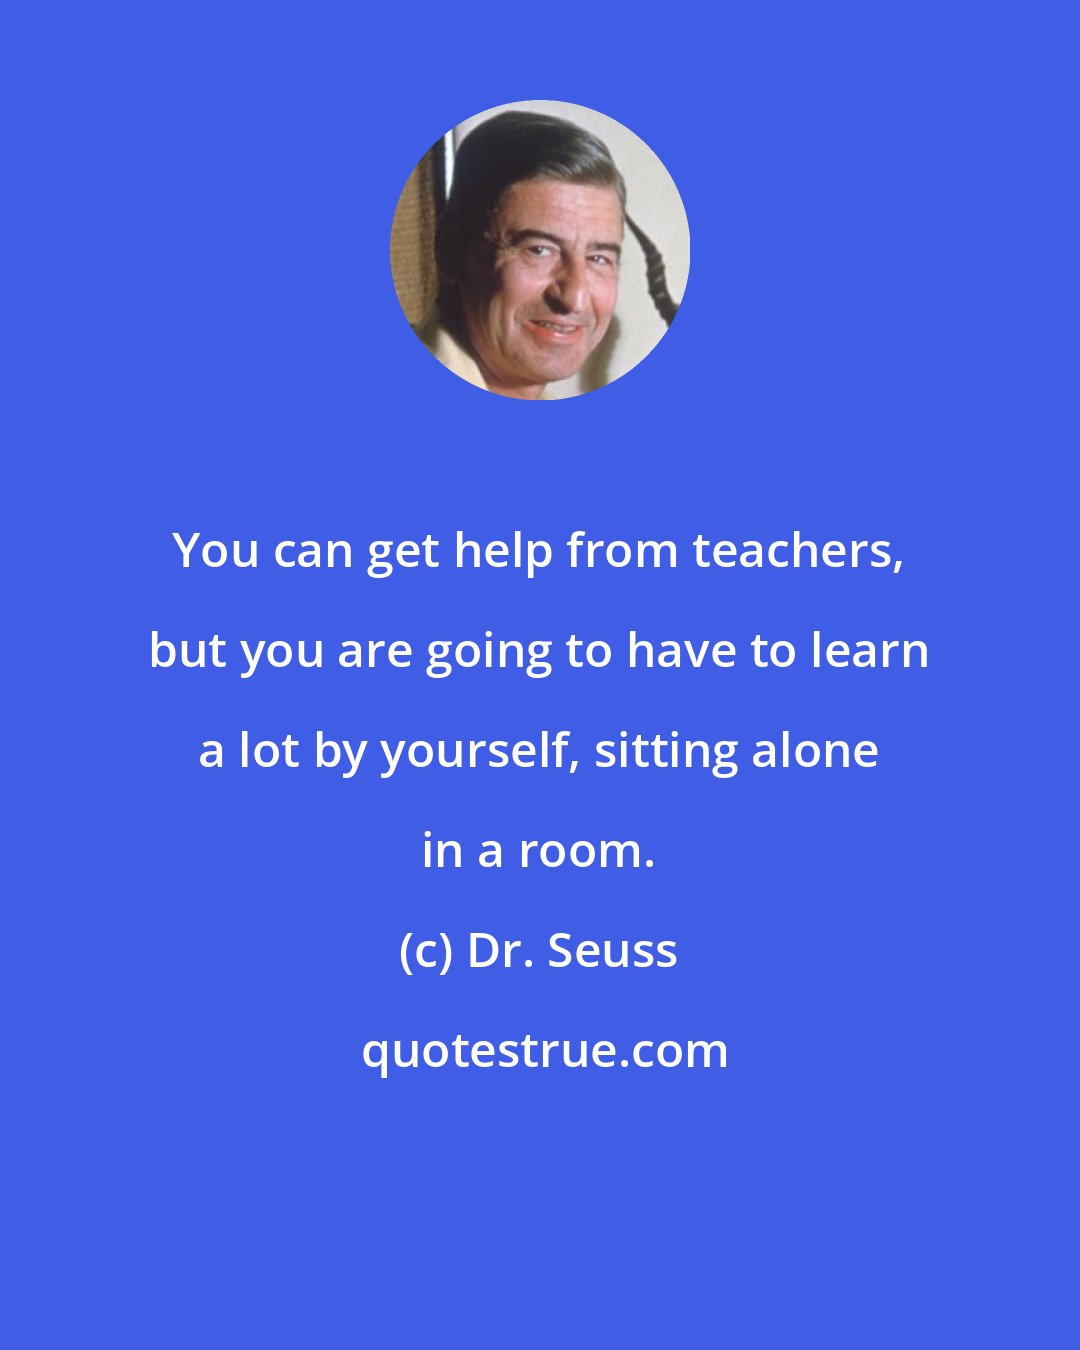 Dr. Seuss: You can get help from teachers, but you are going to have to learn a lot by yourself, sitting alone in a room.